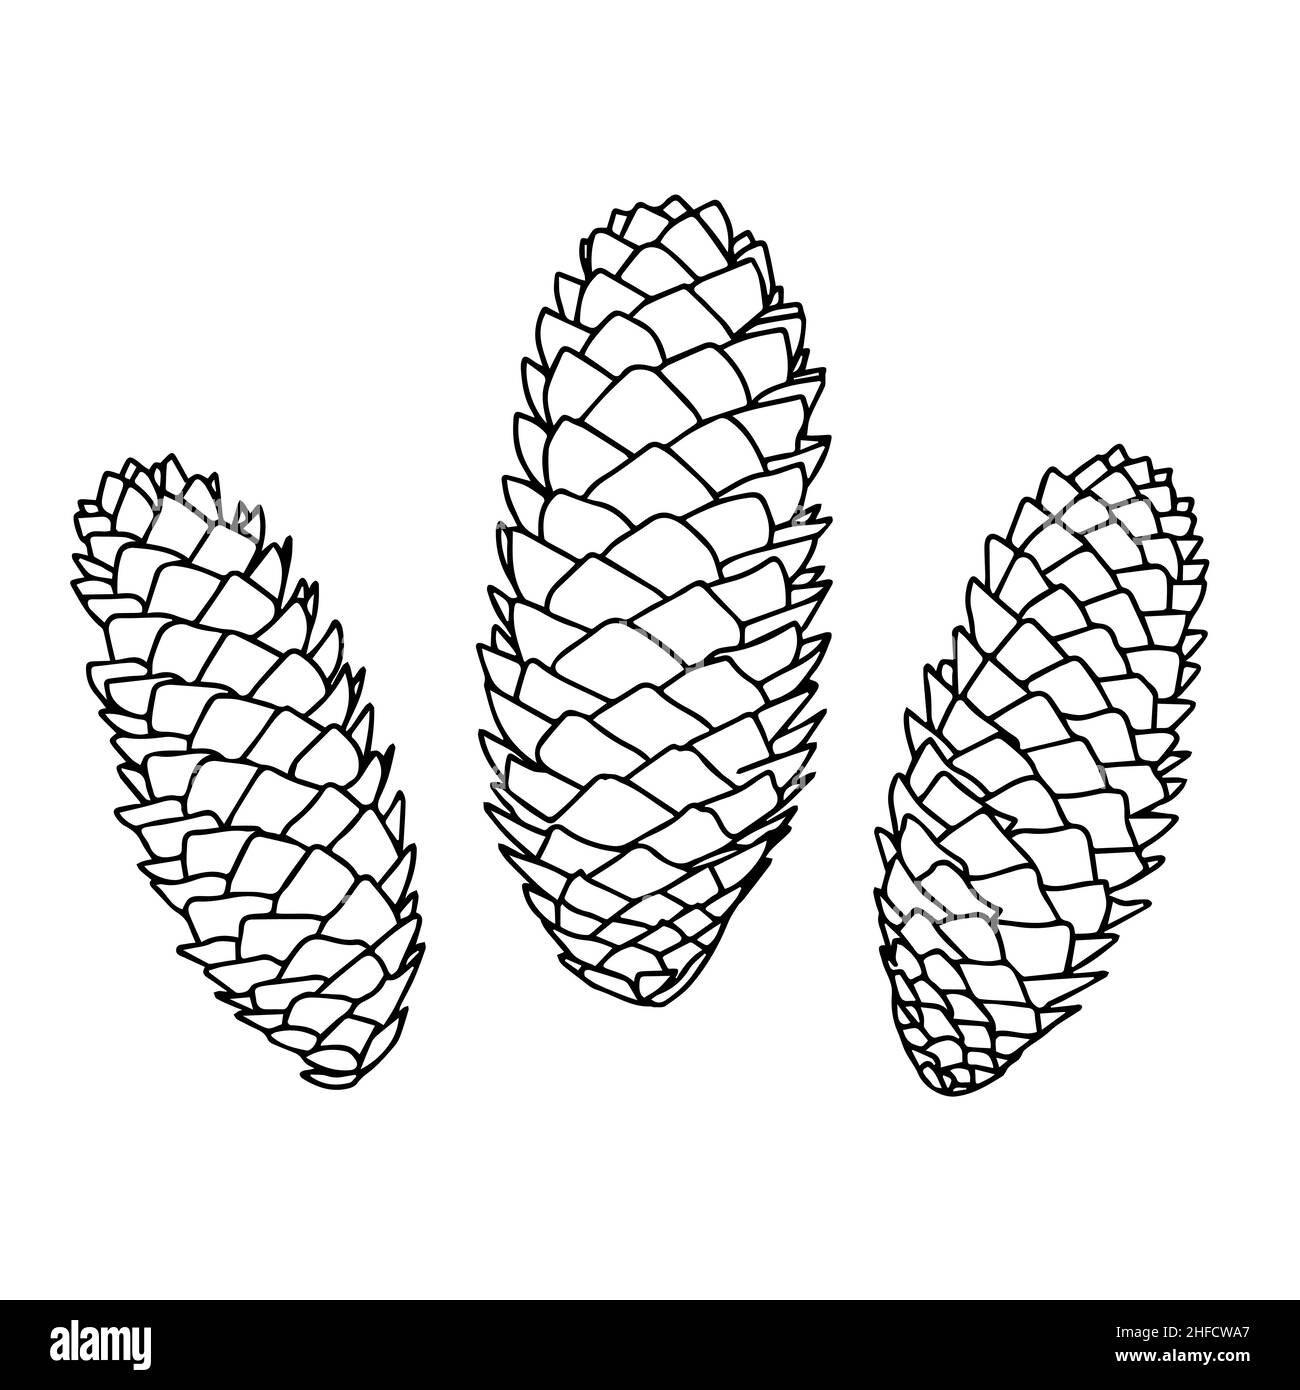 Contour drawing of pine cones isolated on a white background. Doodle style. Stock Vector